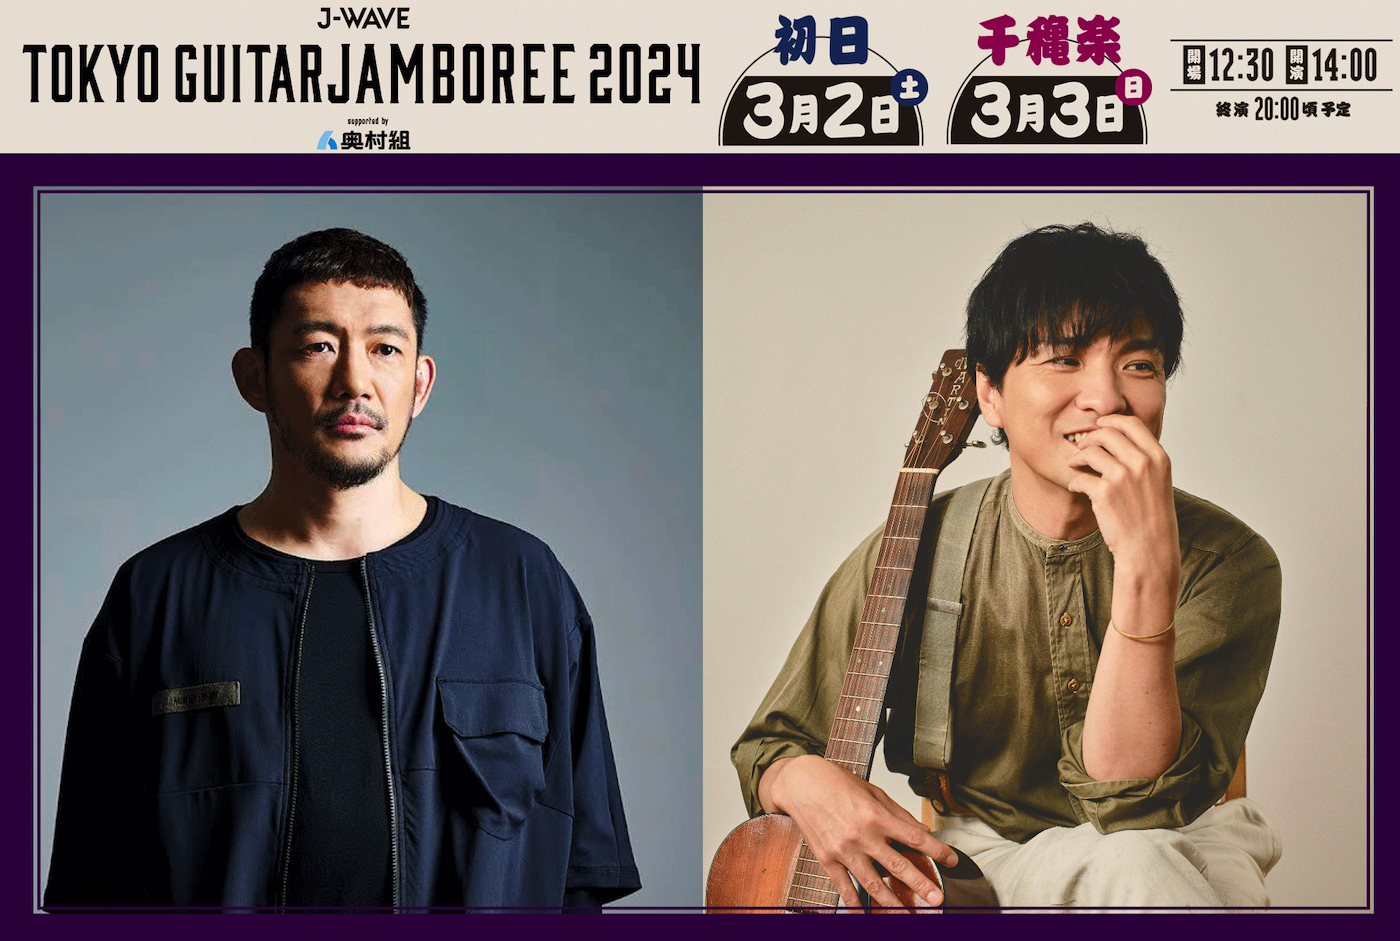 『J-WAVE TOKYO GUITAR JAMBOREE 2024 supported by 奥村組』